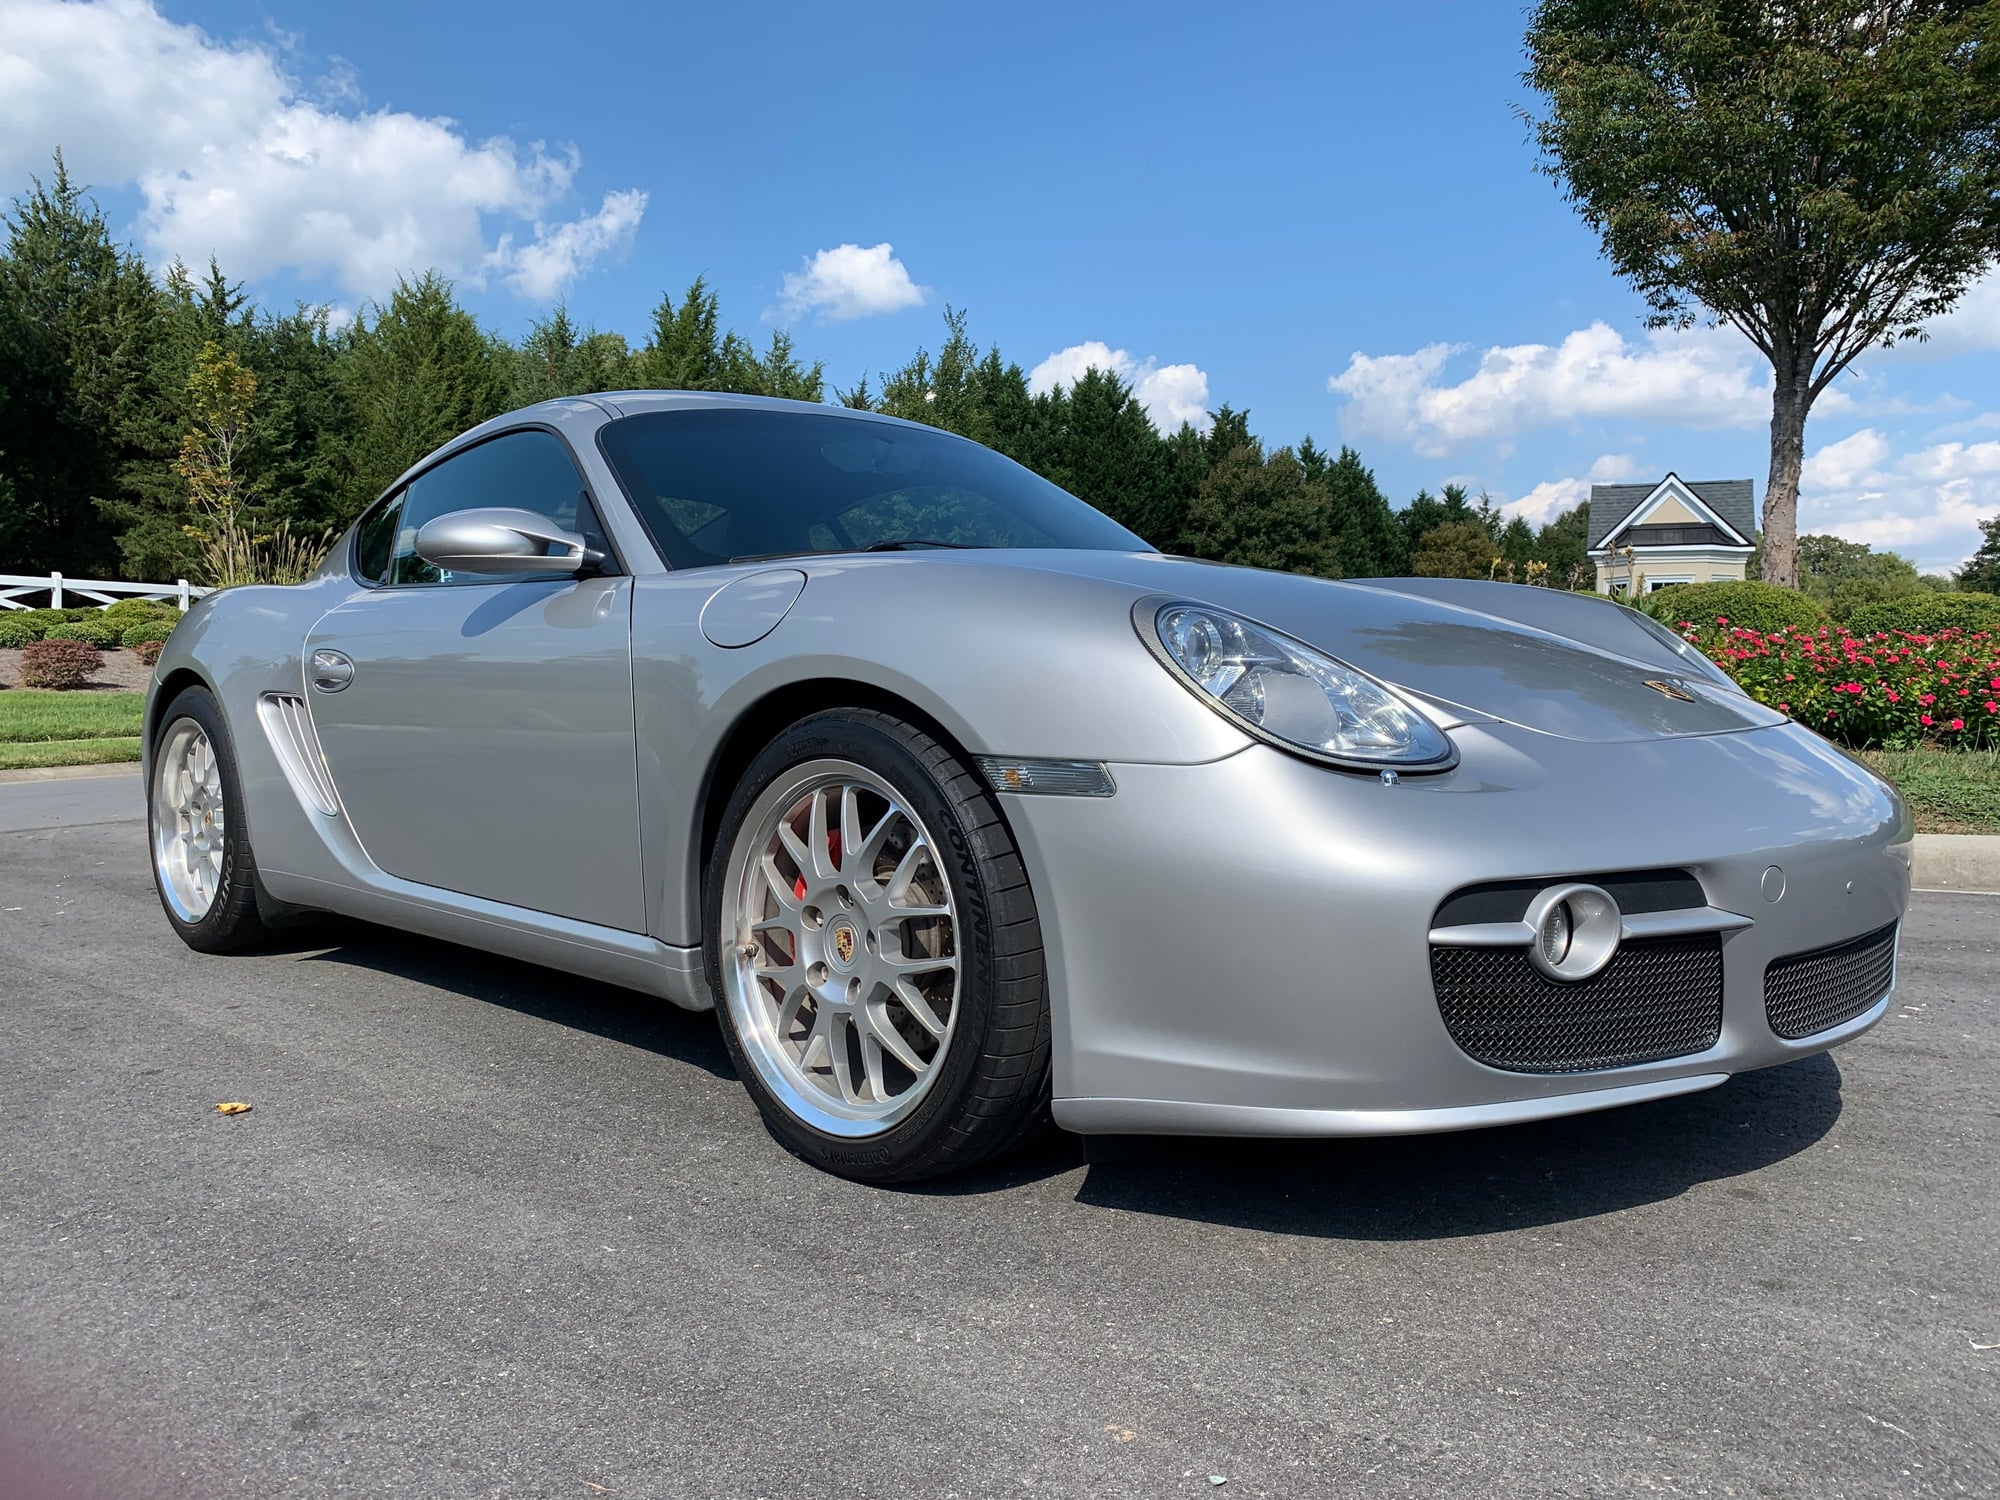 2006 Porsche Cayman - 2006 Porsche Cayman S Well Built W/ Mods For Reliability - Used - VIN WPOAB29816U780305 - 125,000 Miles - 6 cyl - 2WD - Manual - Coupe - Silver - Marvin, NC 28173, United States